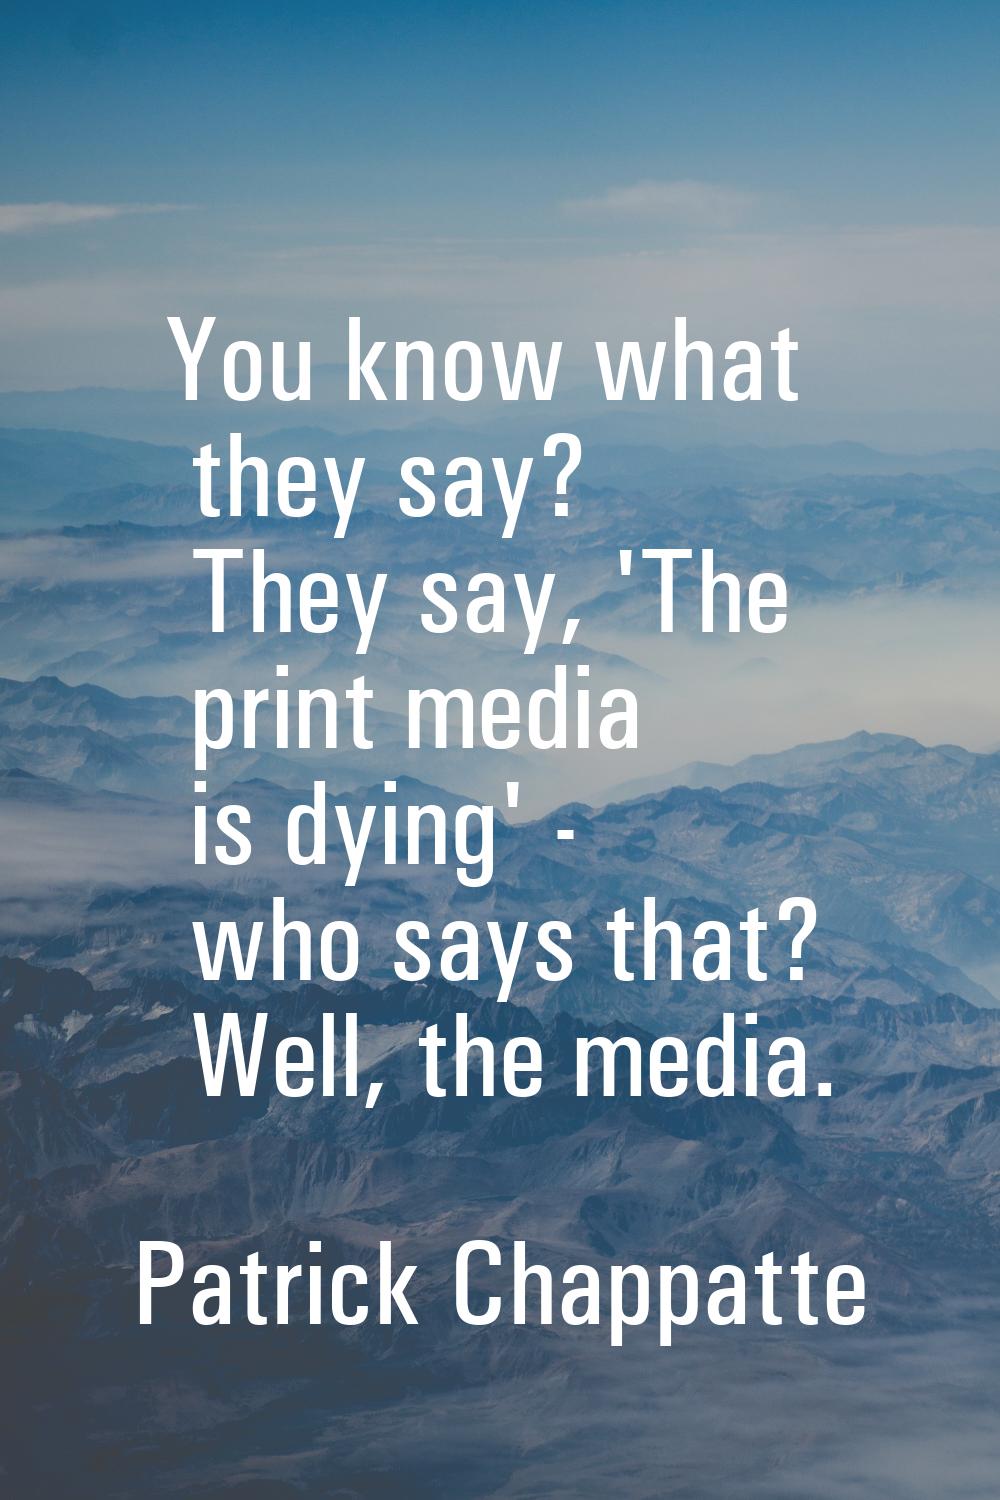 You know what they say? They say, 'The print media is dying' - who says that? Well, the media.